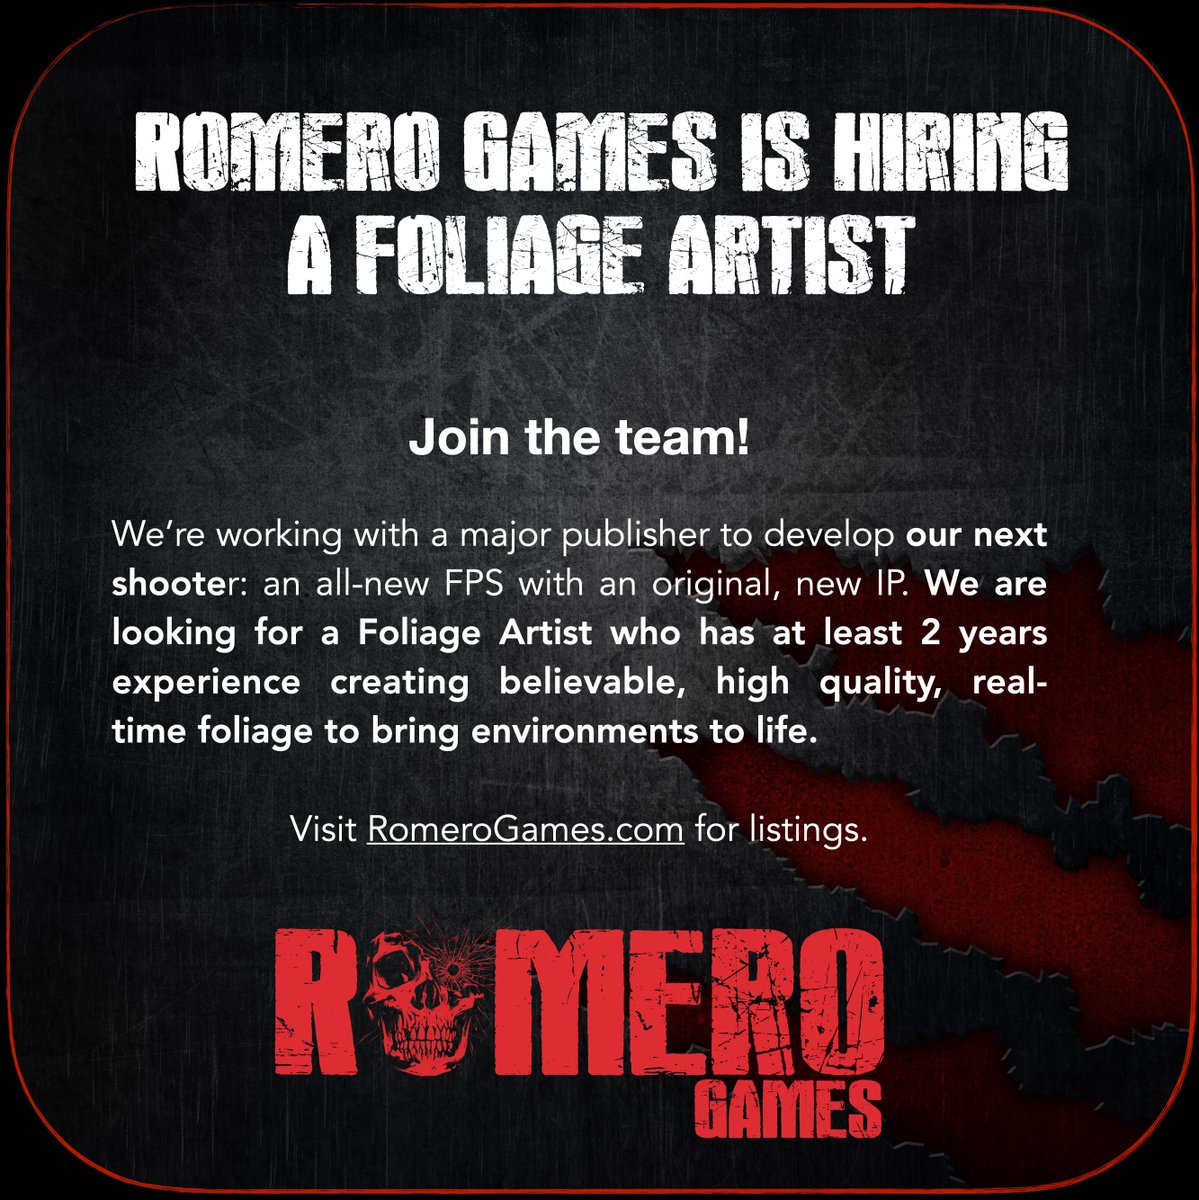 Hiring! Foliage Artist who has at least 2 years experience creating believable, high quality, real-time foliage to bring environments to life. romero_games.traffit.com/public/an/TEV3…
#gamejobs #hiring #foliage #gameartist #gamedev #artjobs #foliageart